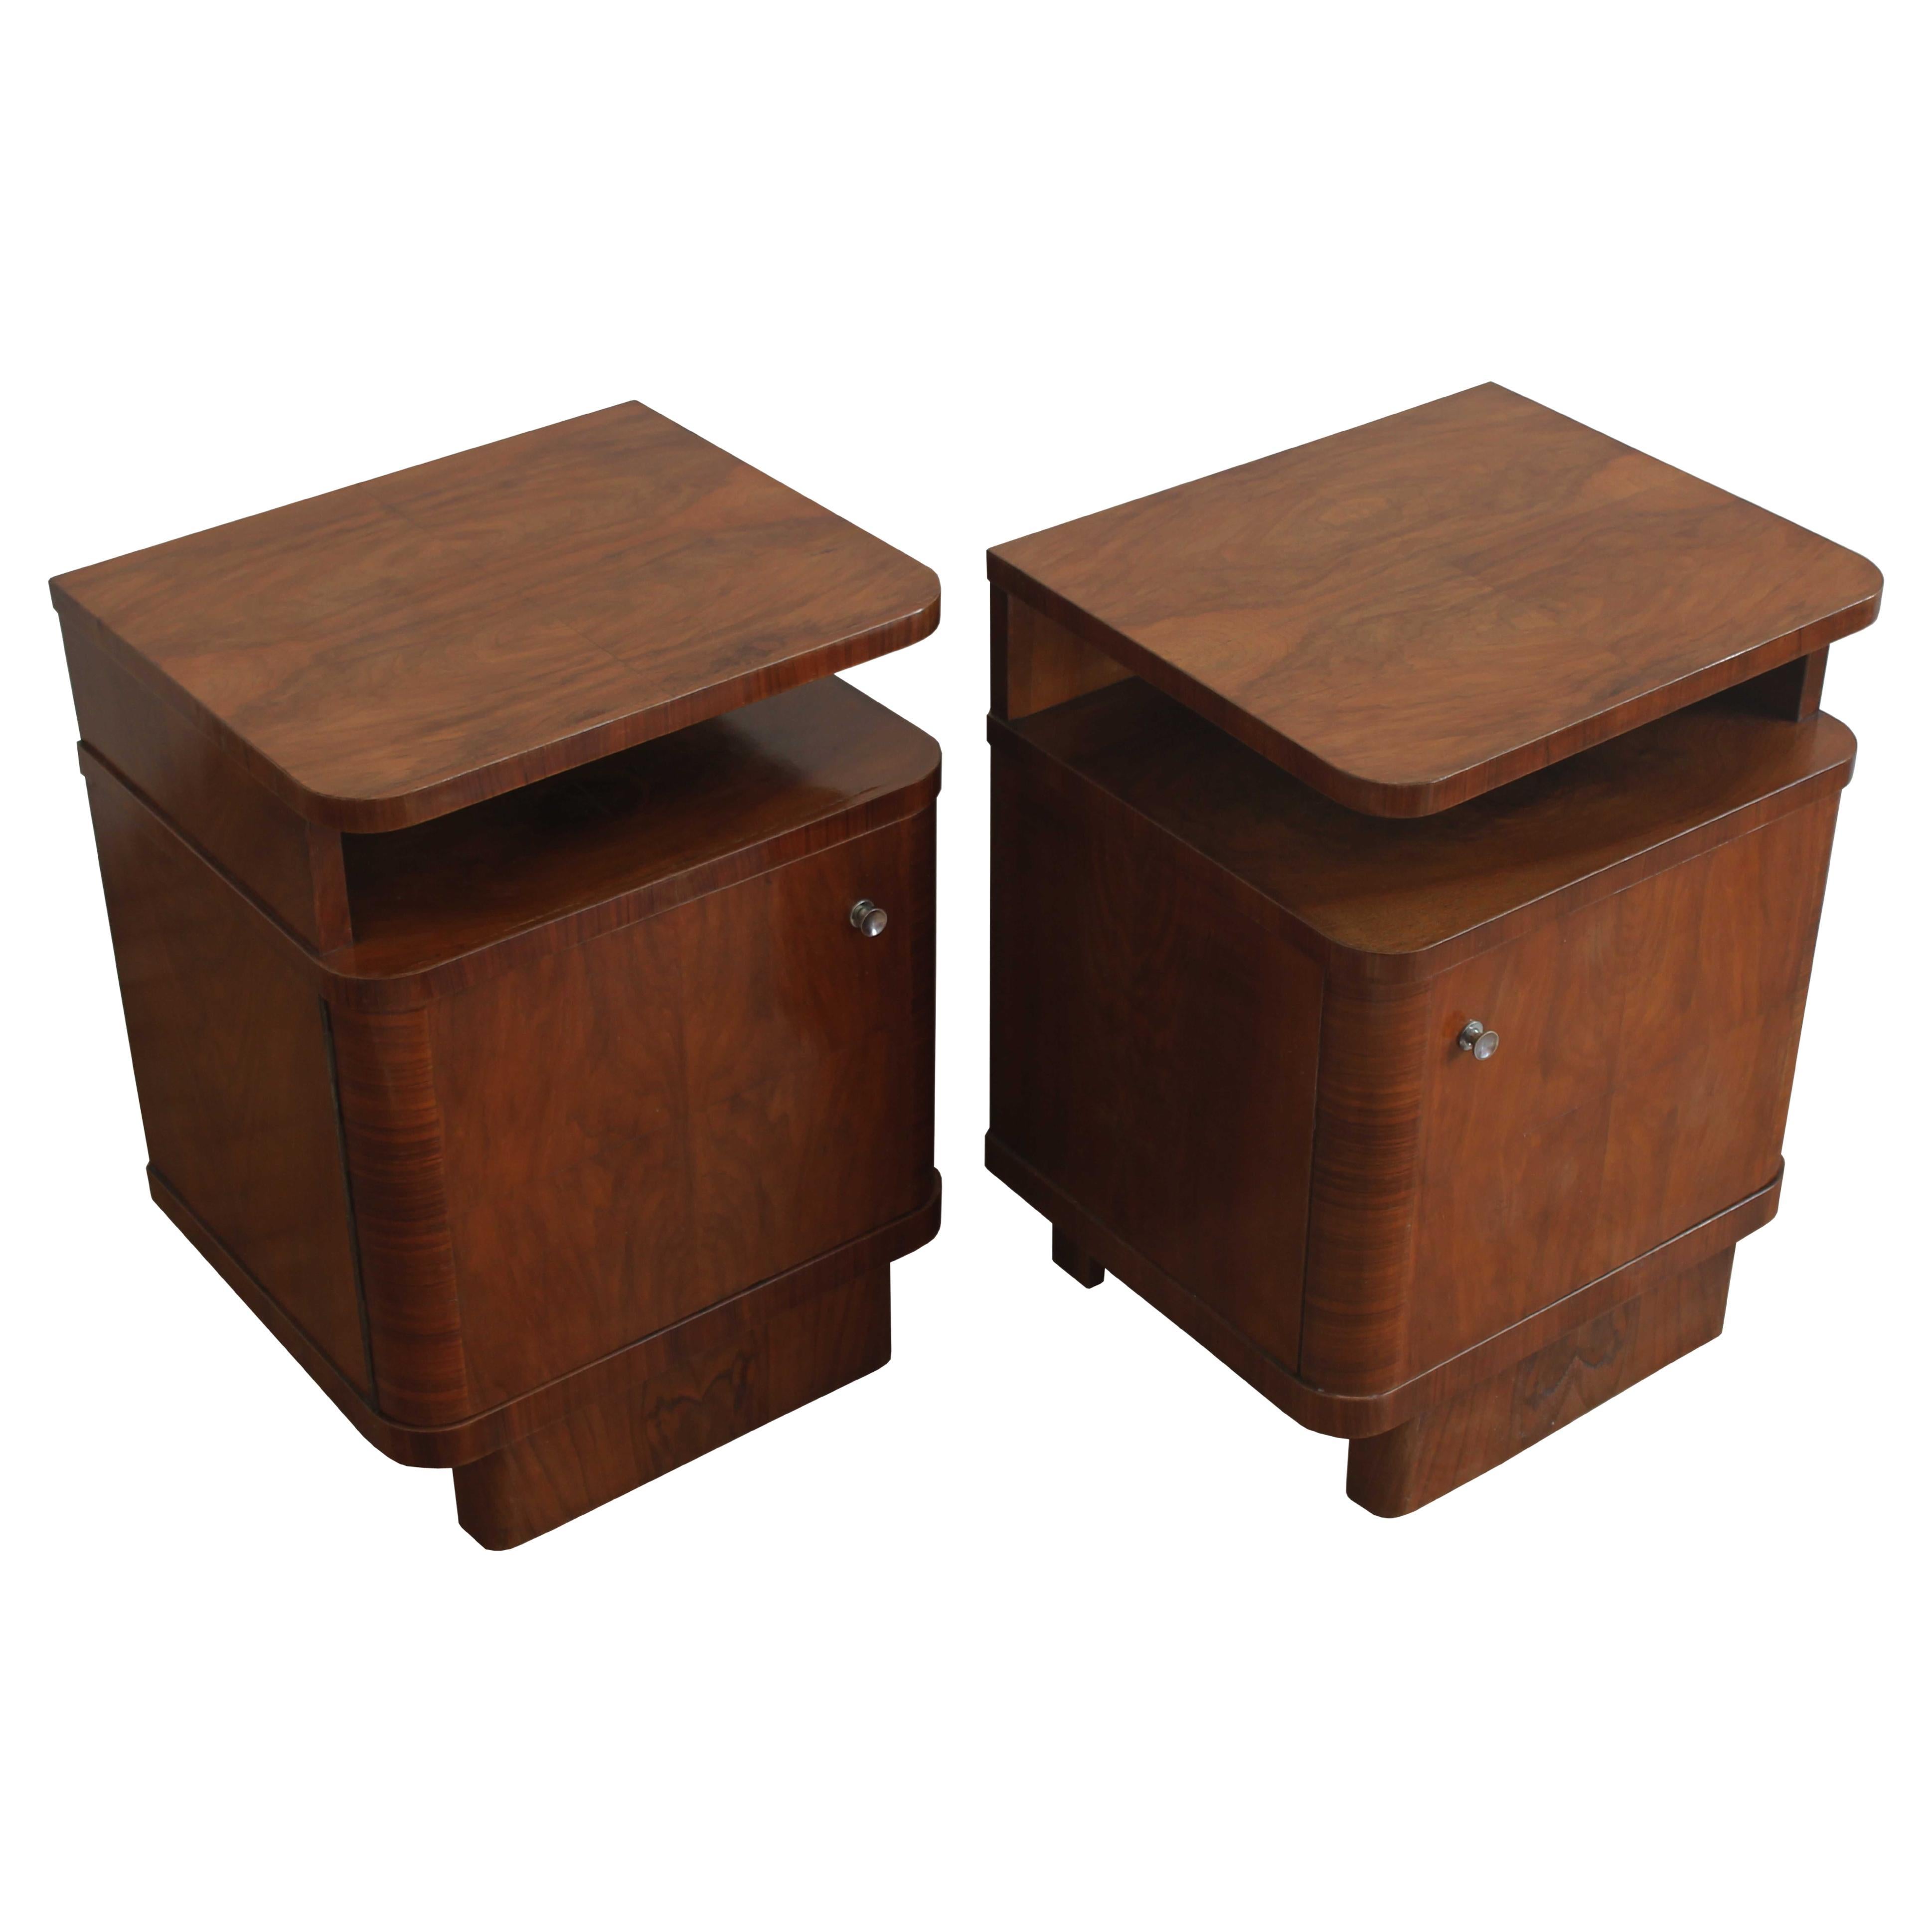 Pair of 1930's Art Deco Bedside Tables